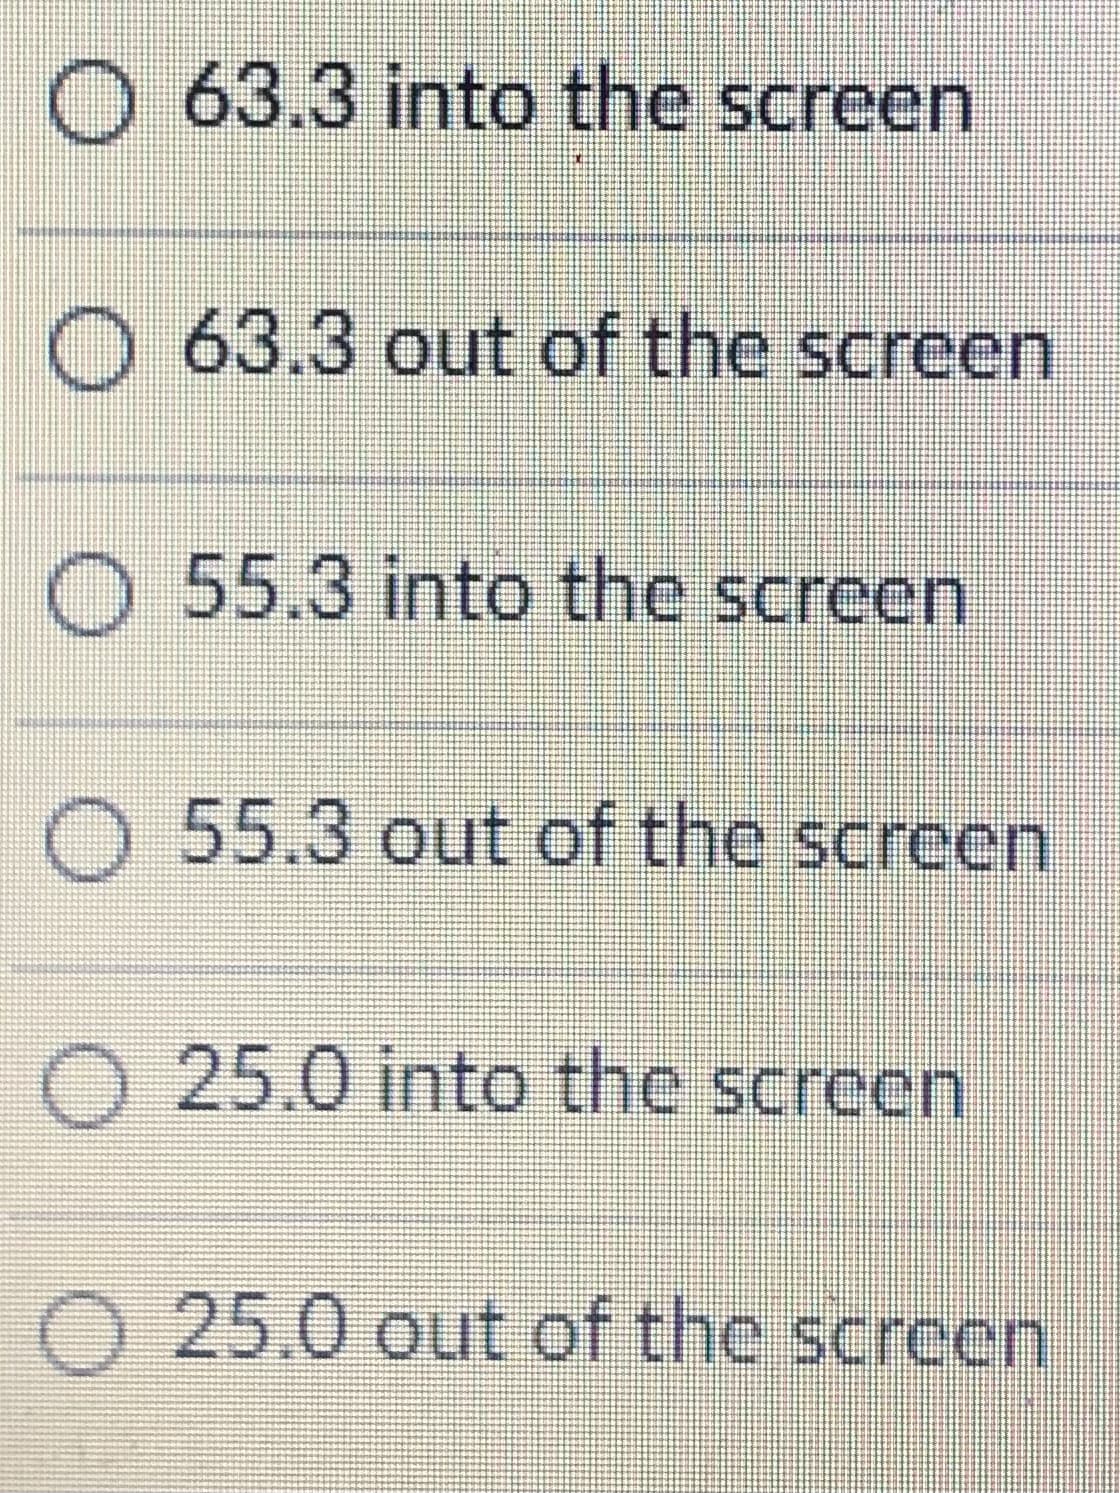 63.3 into the screen
O 63.3 out of the screen
55.3 into the screen
2 55.3 out of the screen
O 25.0 into the screen
O 25.0 out of the screen
